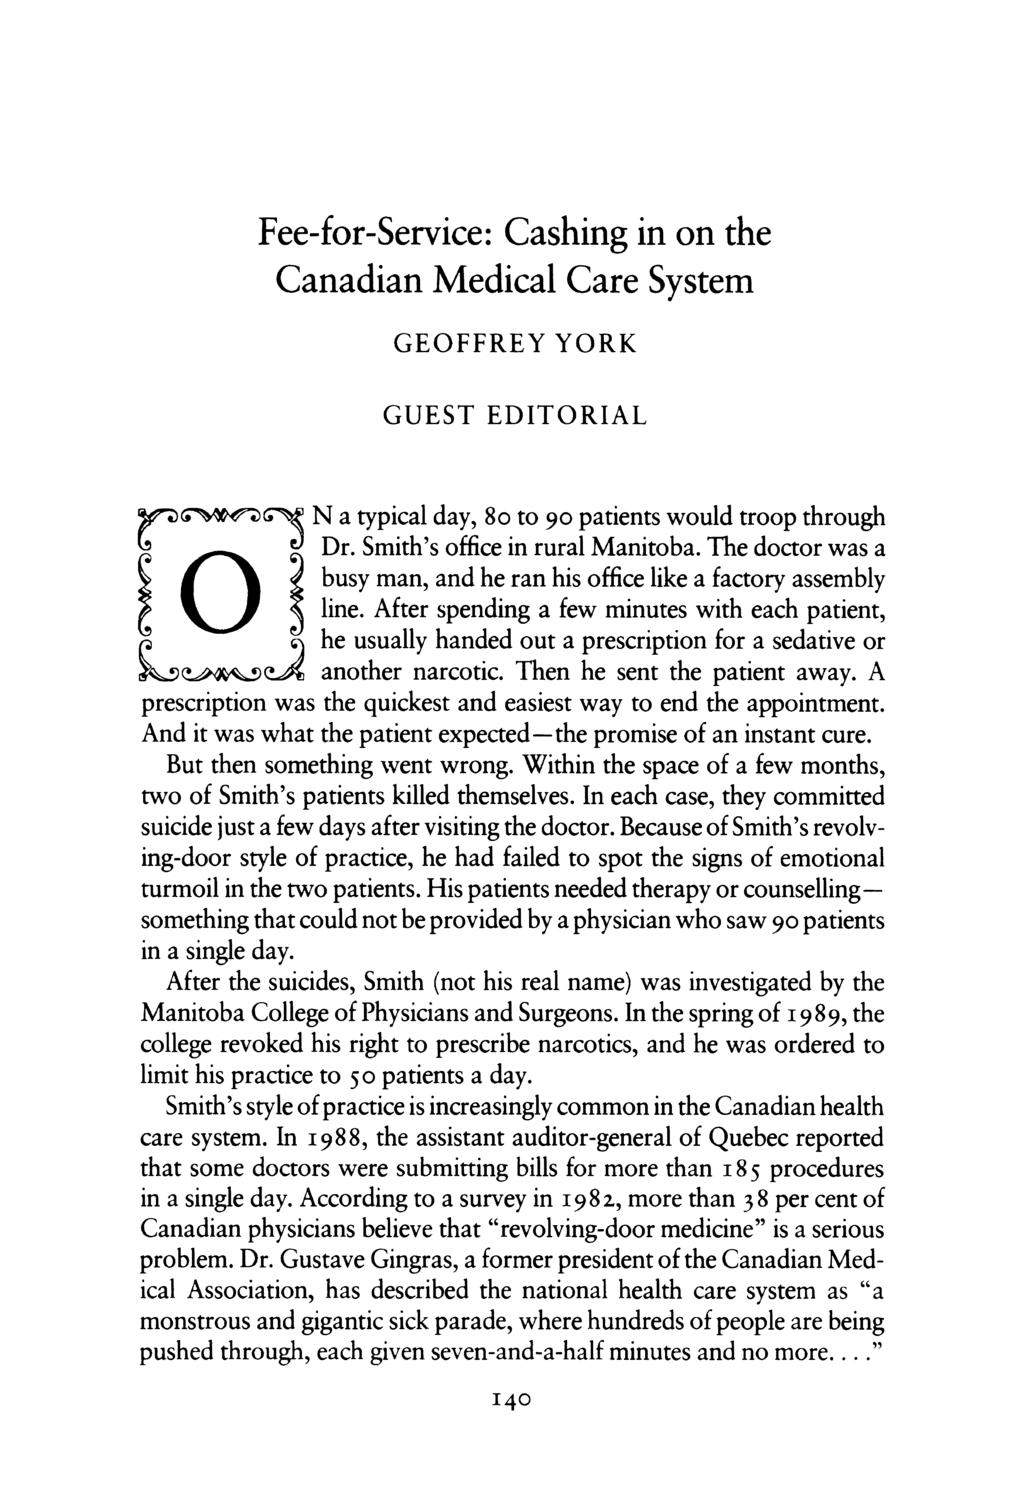 Fee-for-Service: Cashing in on the Canadian Medical Care System GEOFFREY YORK GUEST EDITORIAL rdg>g N a typical day, 8o to go patients would troop through O c} Dr. Smith's office in rural Manitoba.